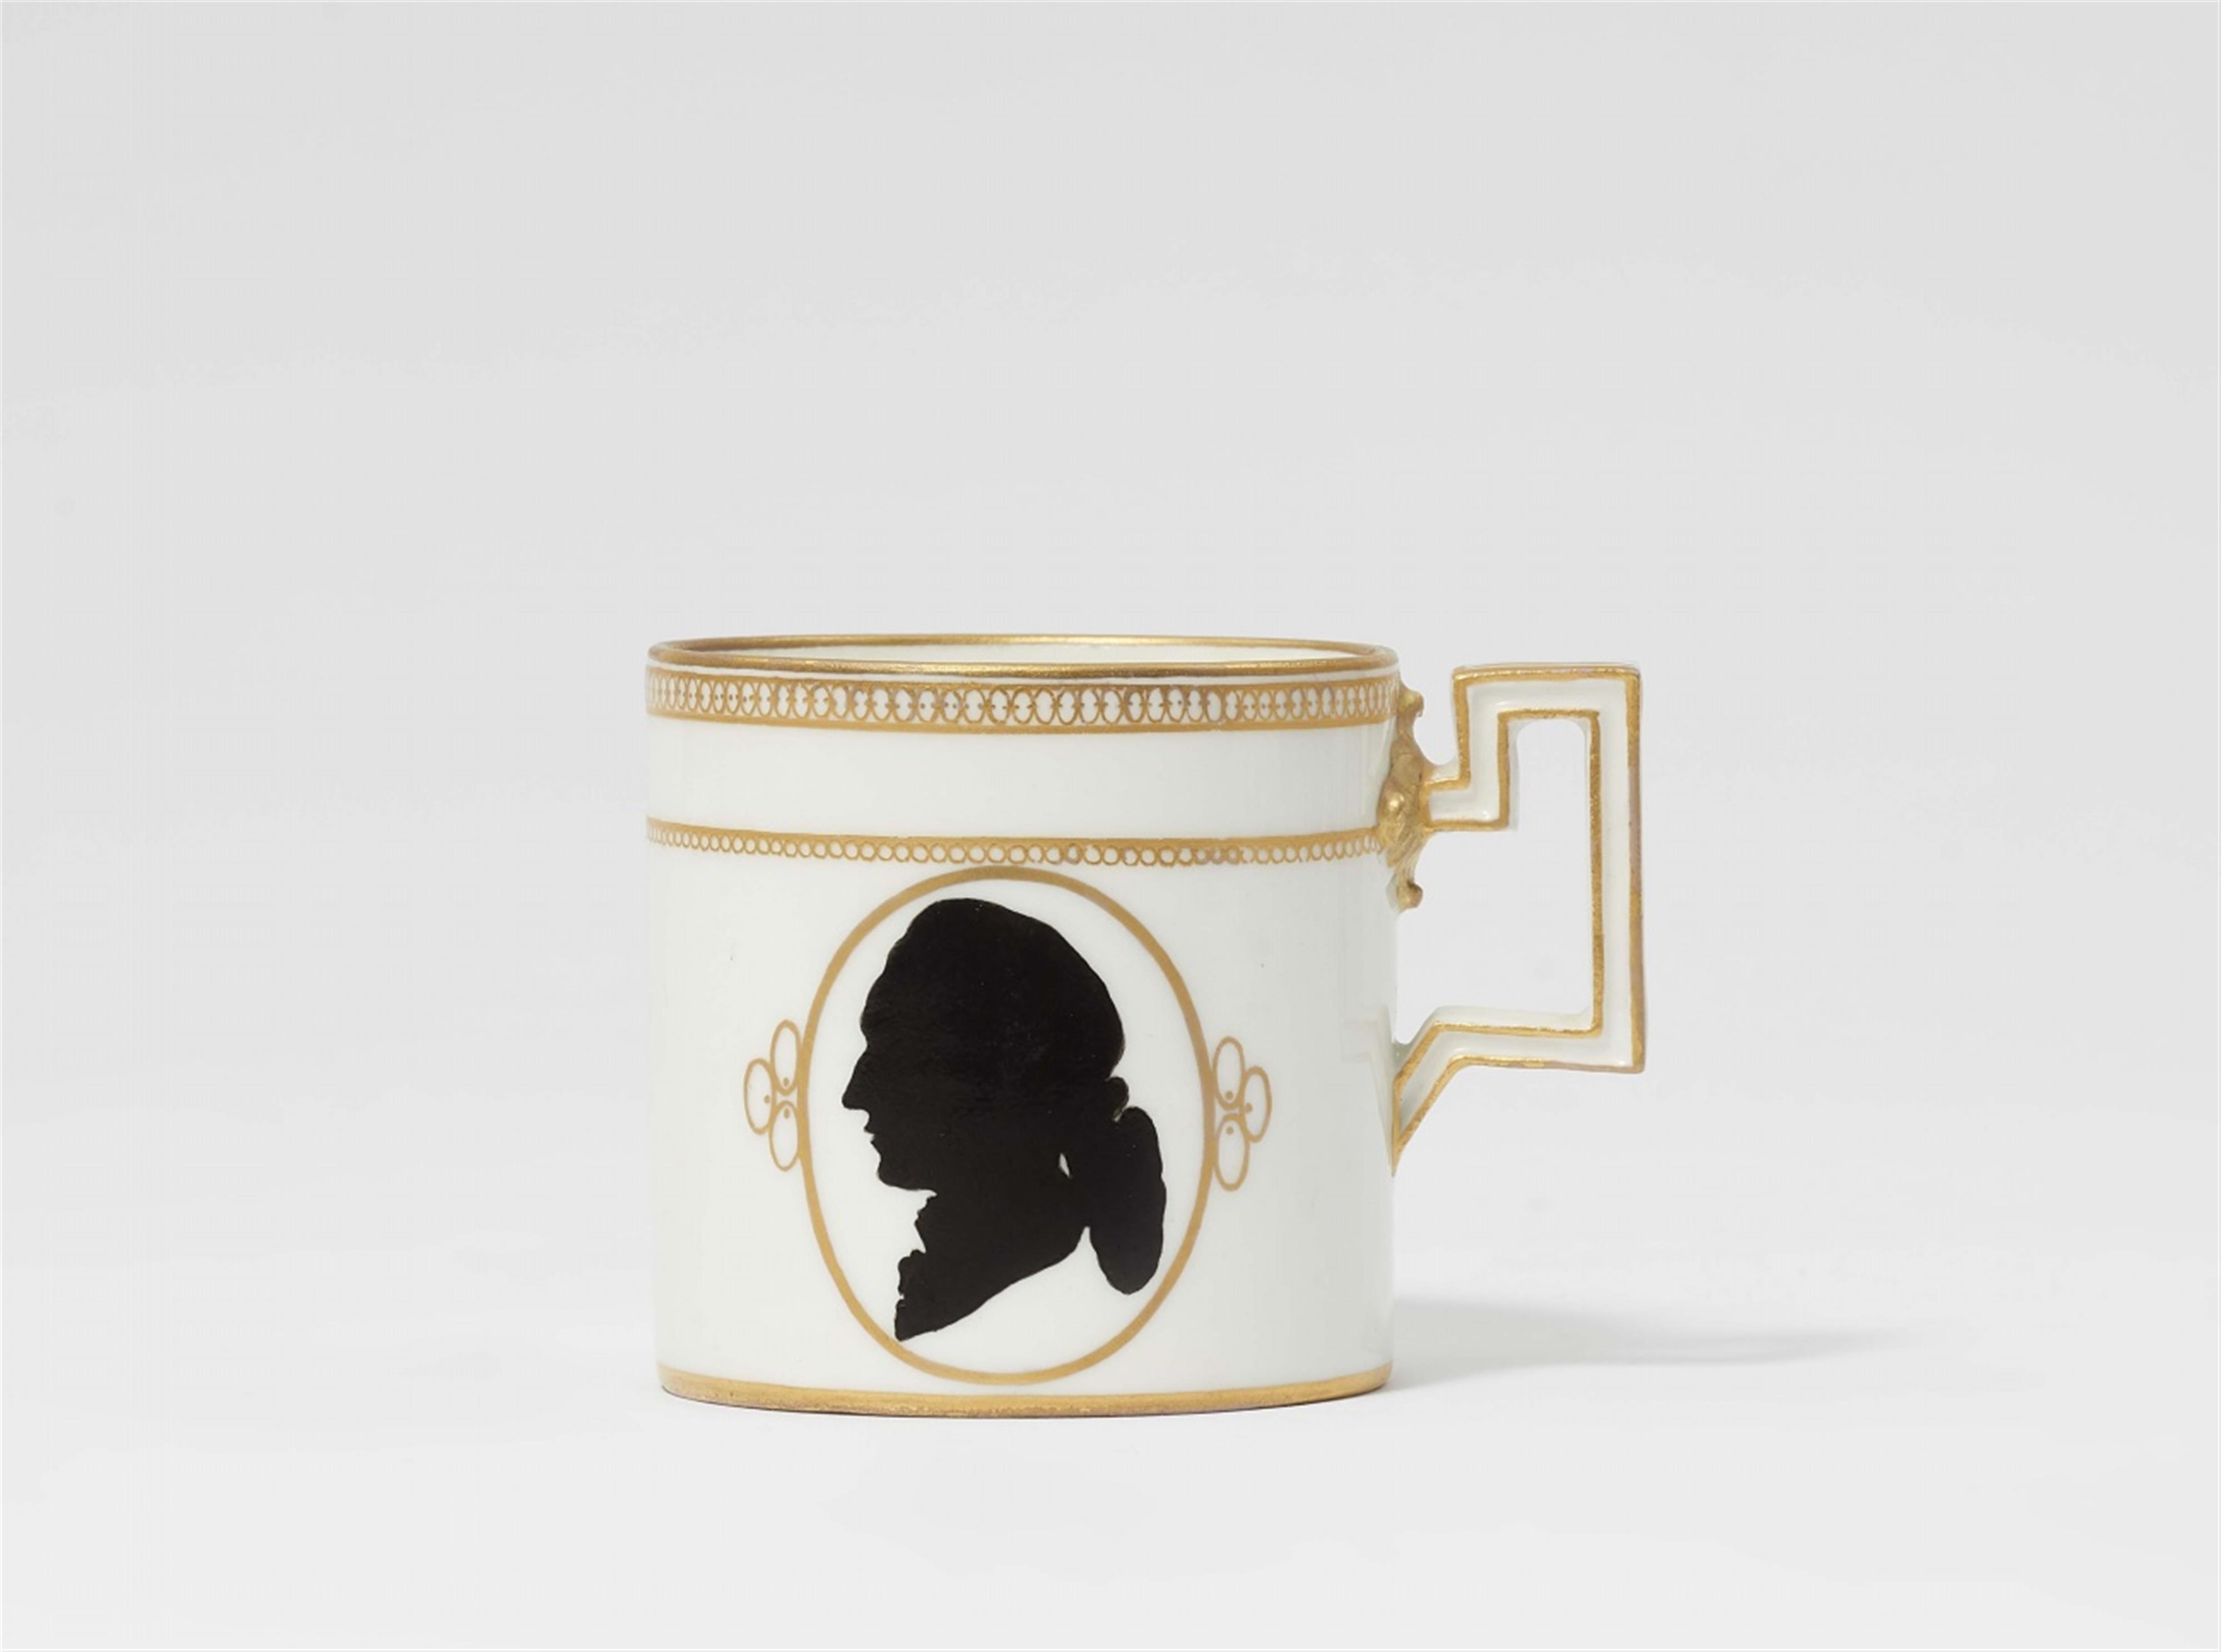 A Meissen porcelain cup with a silhouette portrait of Goethe - image-1